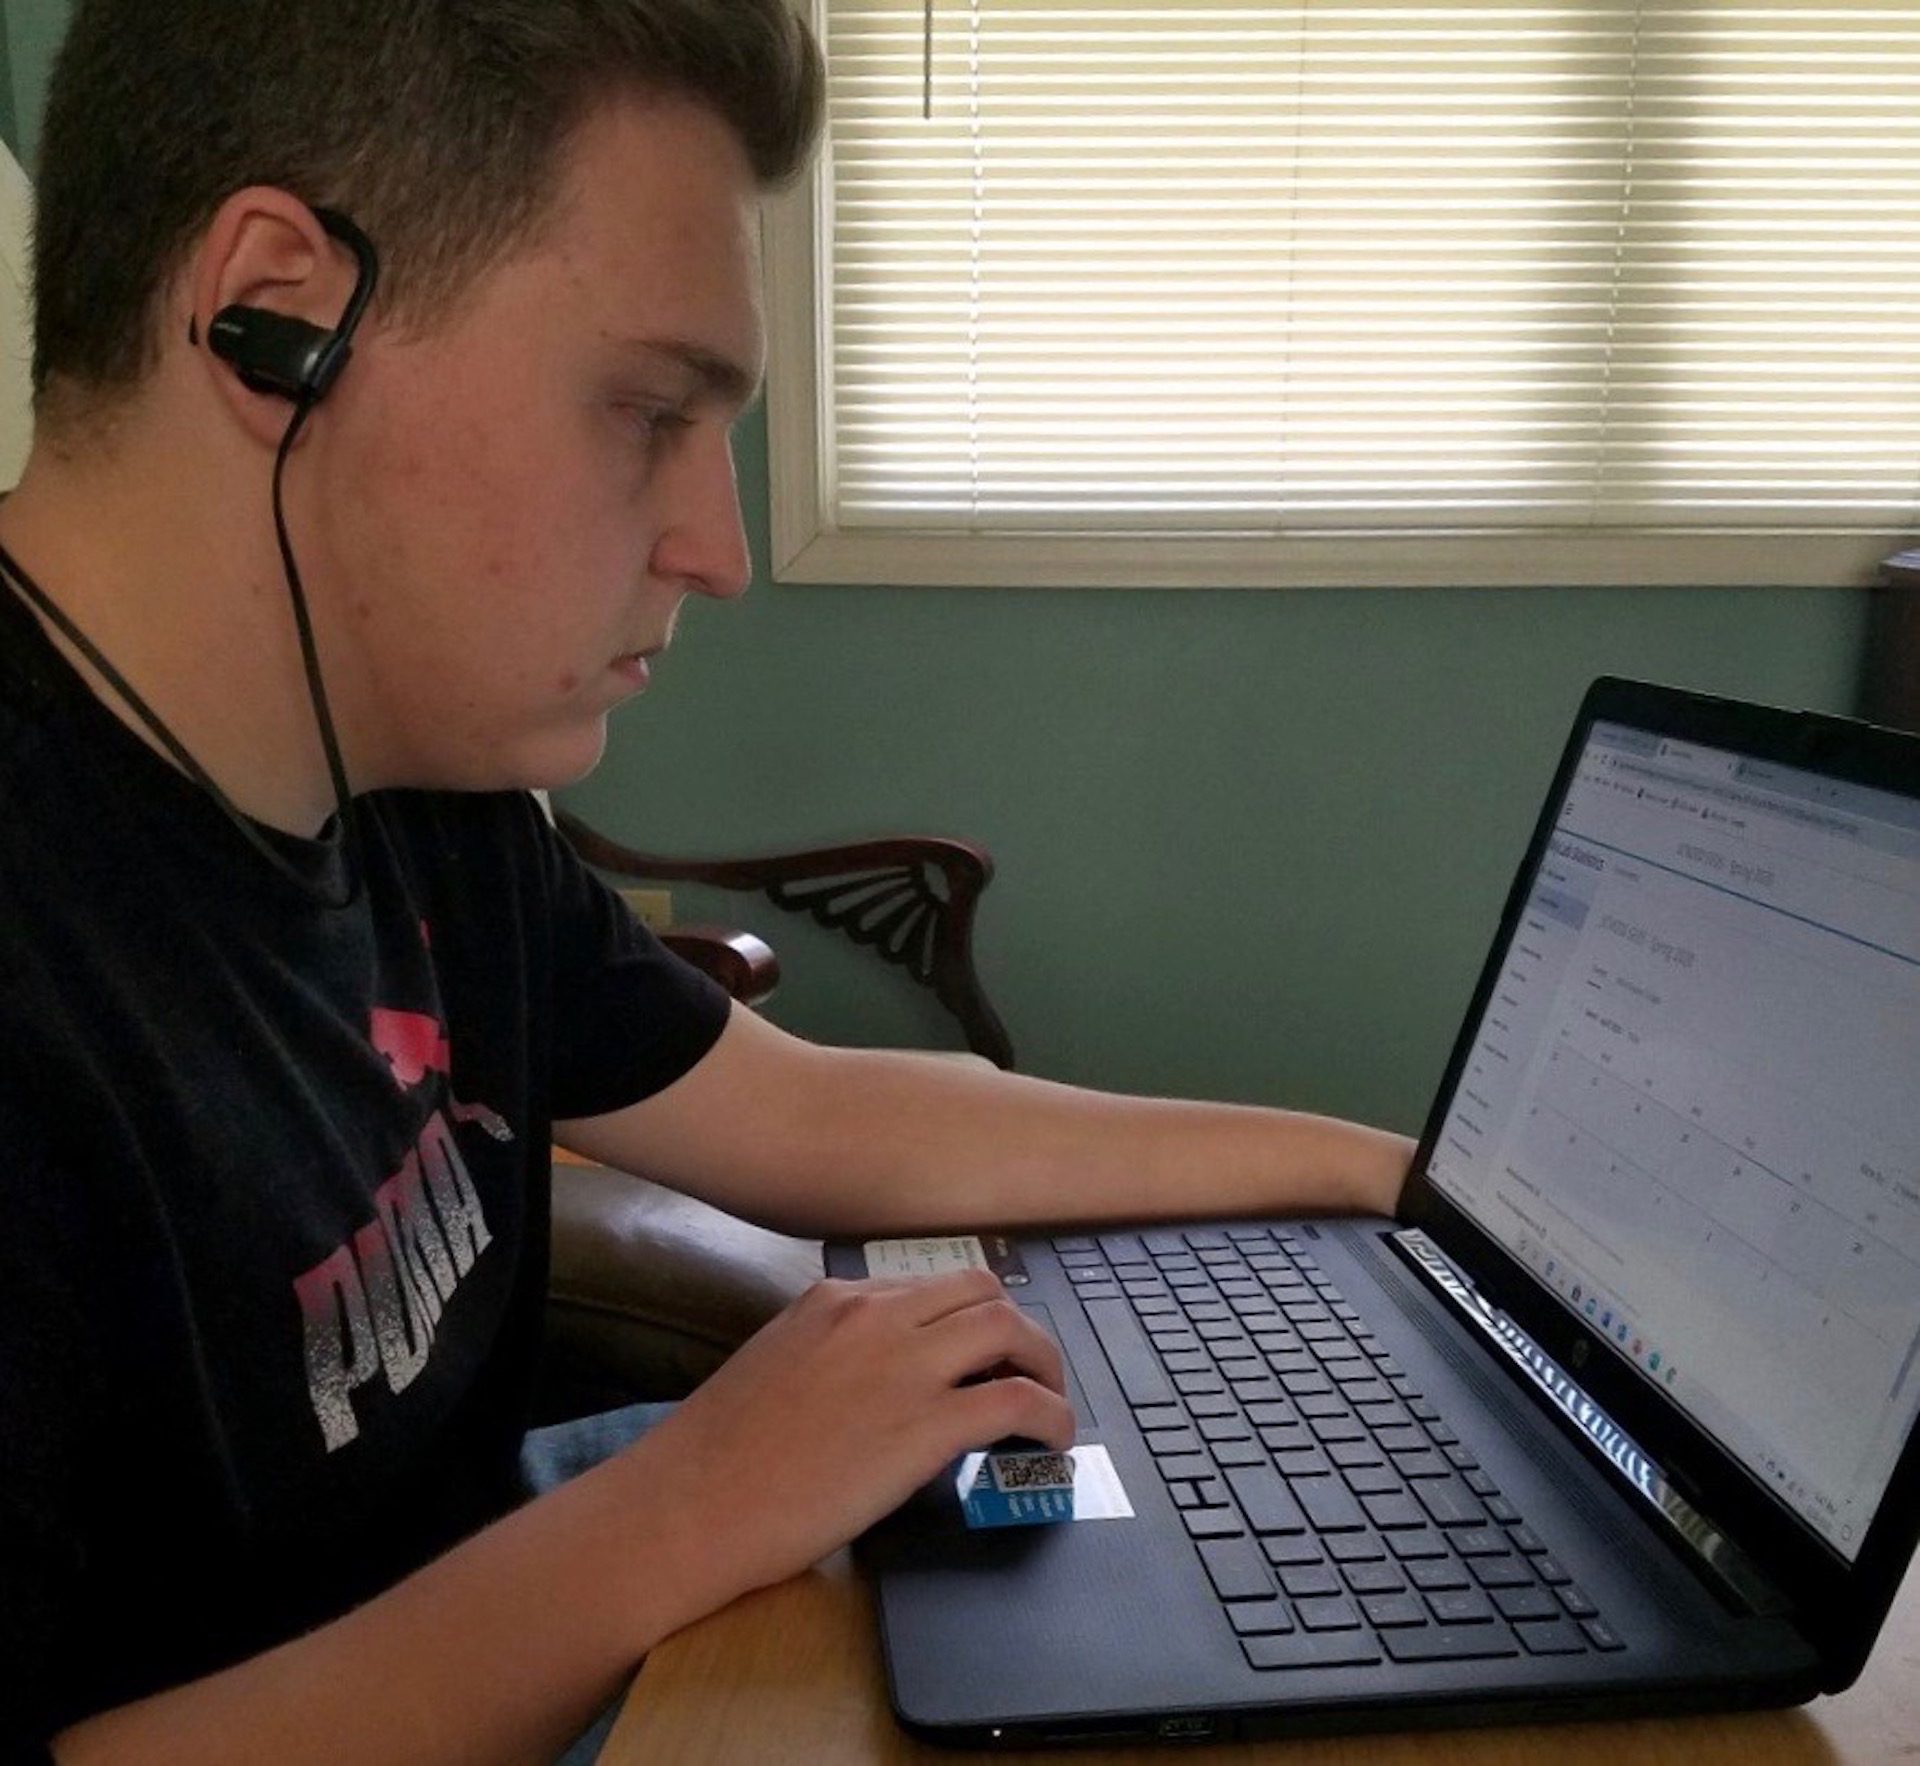 Shippensburg University sophomore Dylan Smith of Silver Spring Township says the transition to fully online-classes this week has gone semi-smooth in the wake of the COVID-19 outbreak but prefers face-to-face instruction.